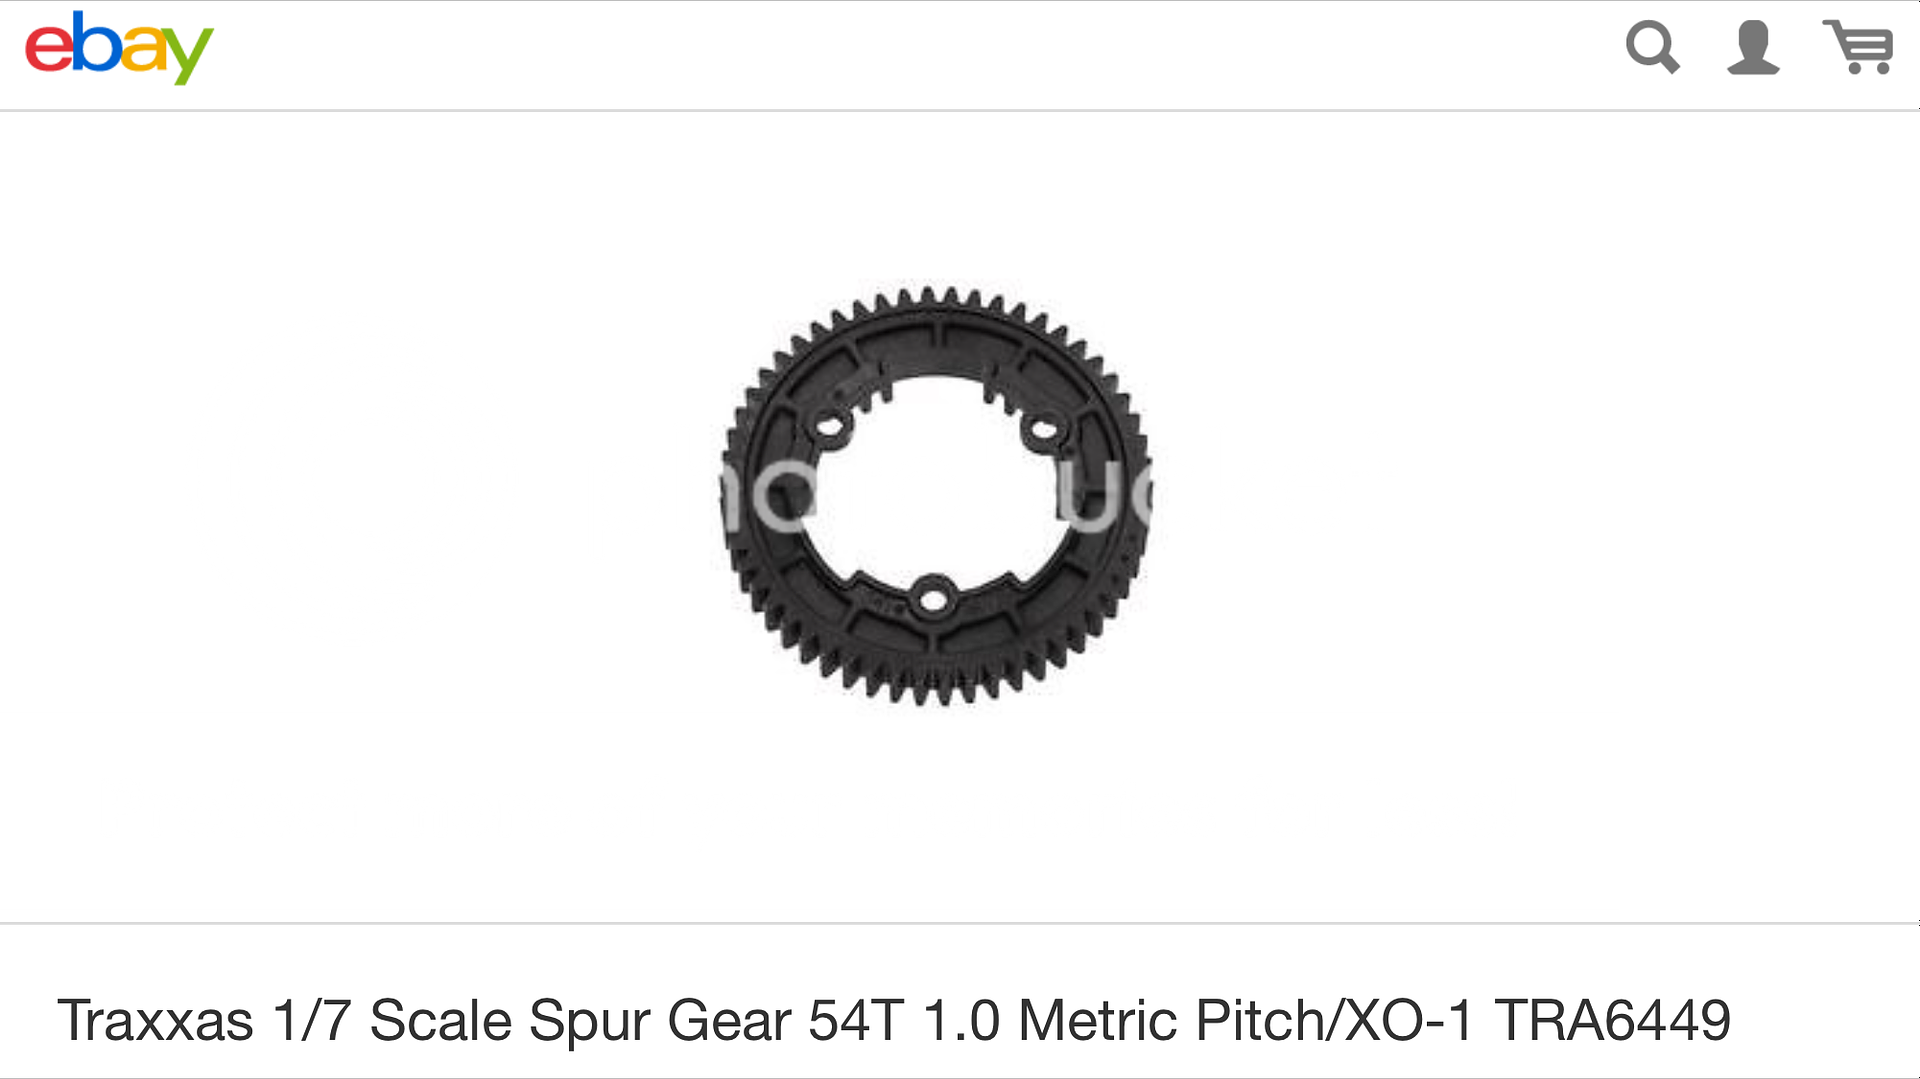 1.0 Metric Pitch TRA6449 Traxxas 6449 54-T Spur Gear Hobbies Toys ...